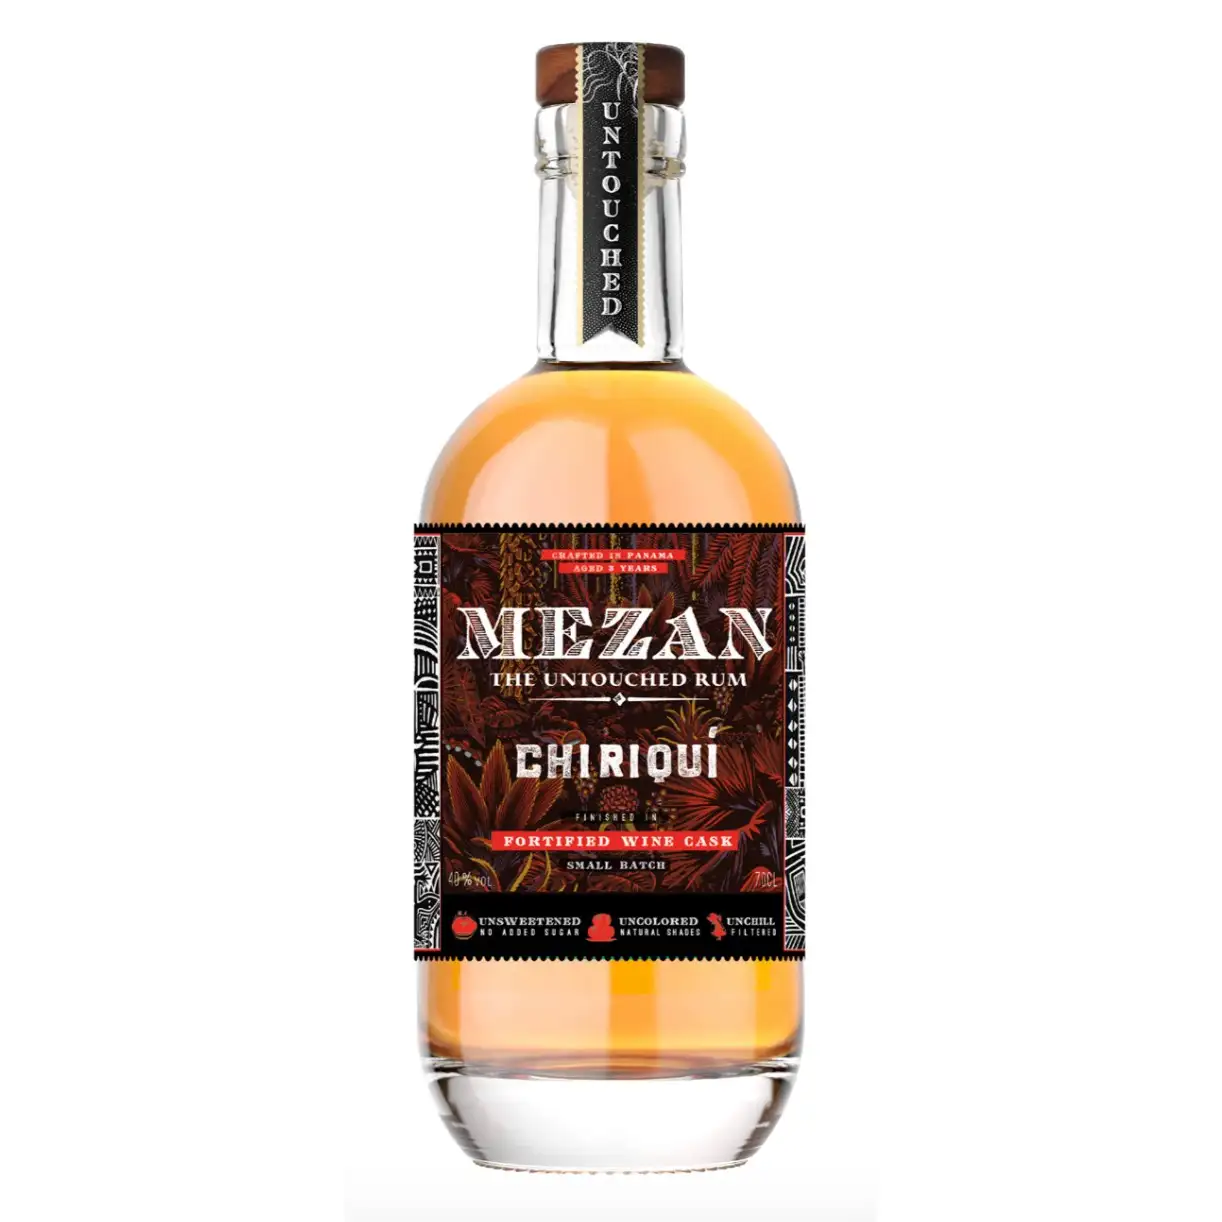 Image of the front of the bottle of the rum Chiriqui